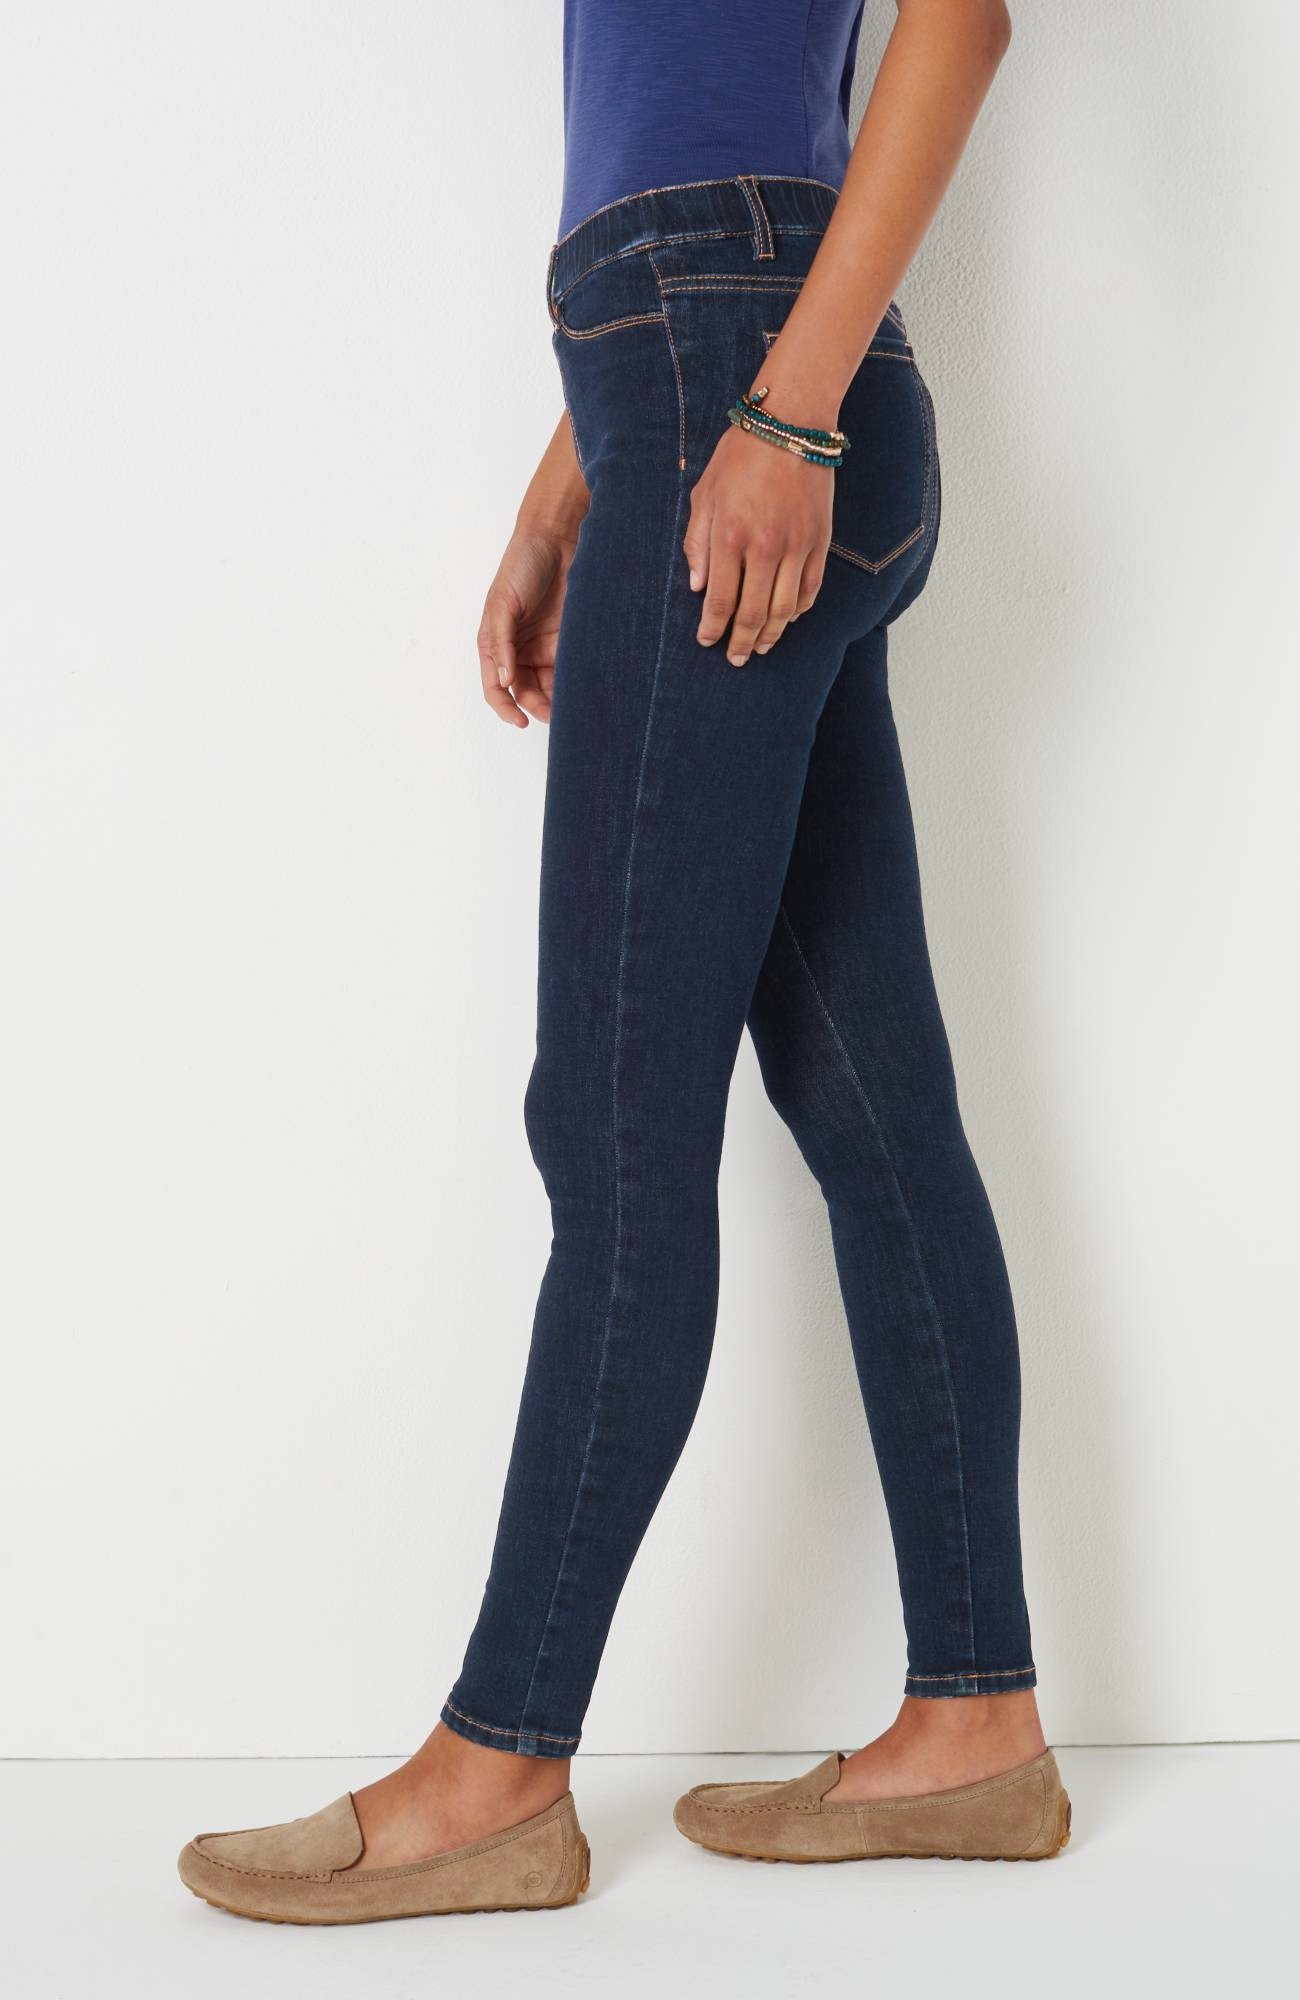 Perfect Pull-On Jeggings